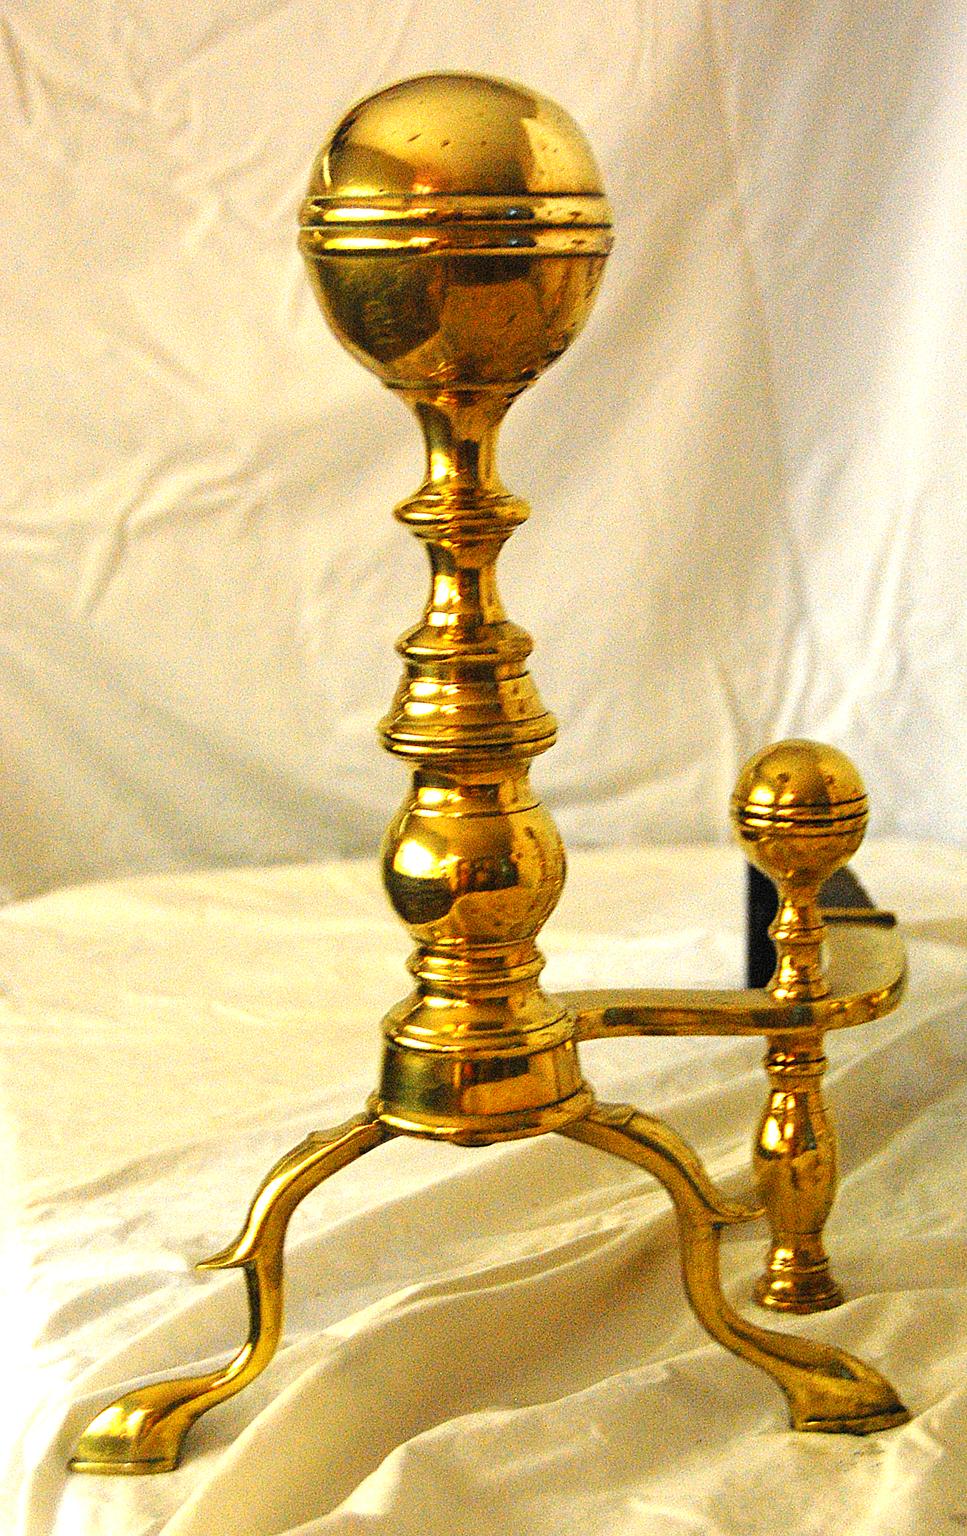 American Federal period brass ball top seamed andirons with spurred legs and spade feet, belted ball tops, Boston Region, circa 1790-1810. Wonderful original ball top and separate leg for the log stops.